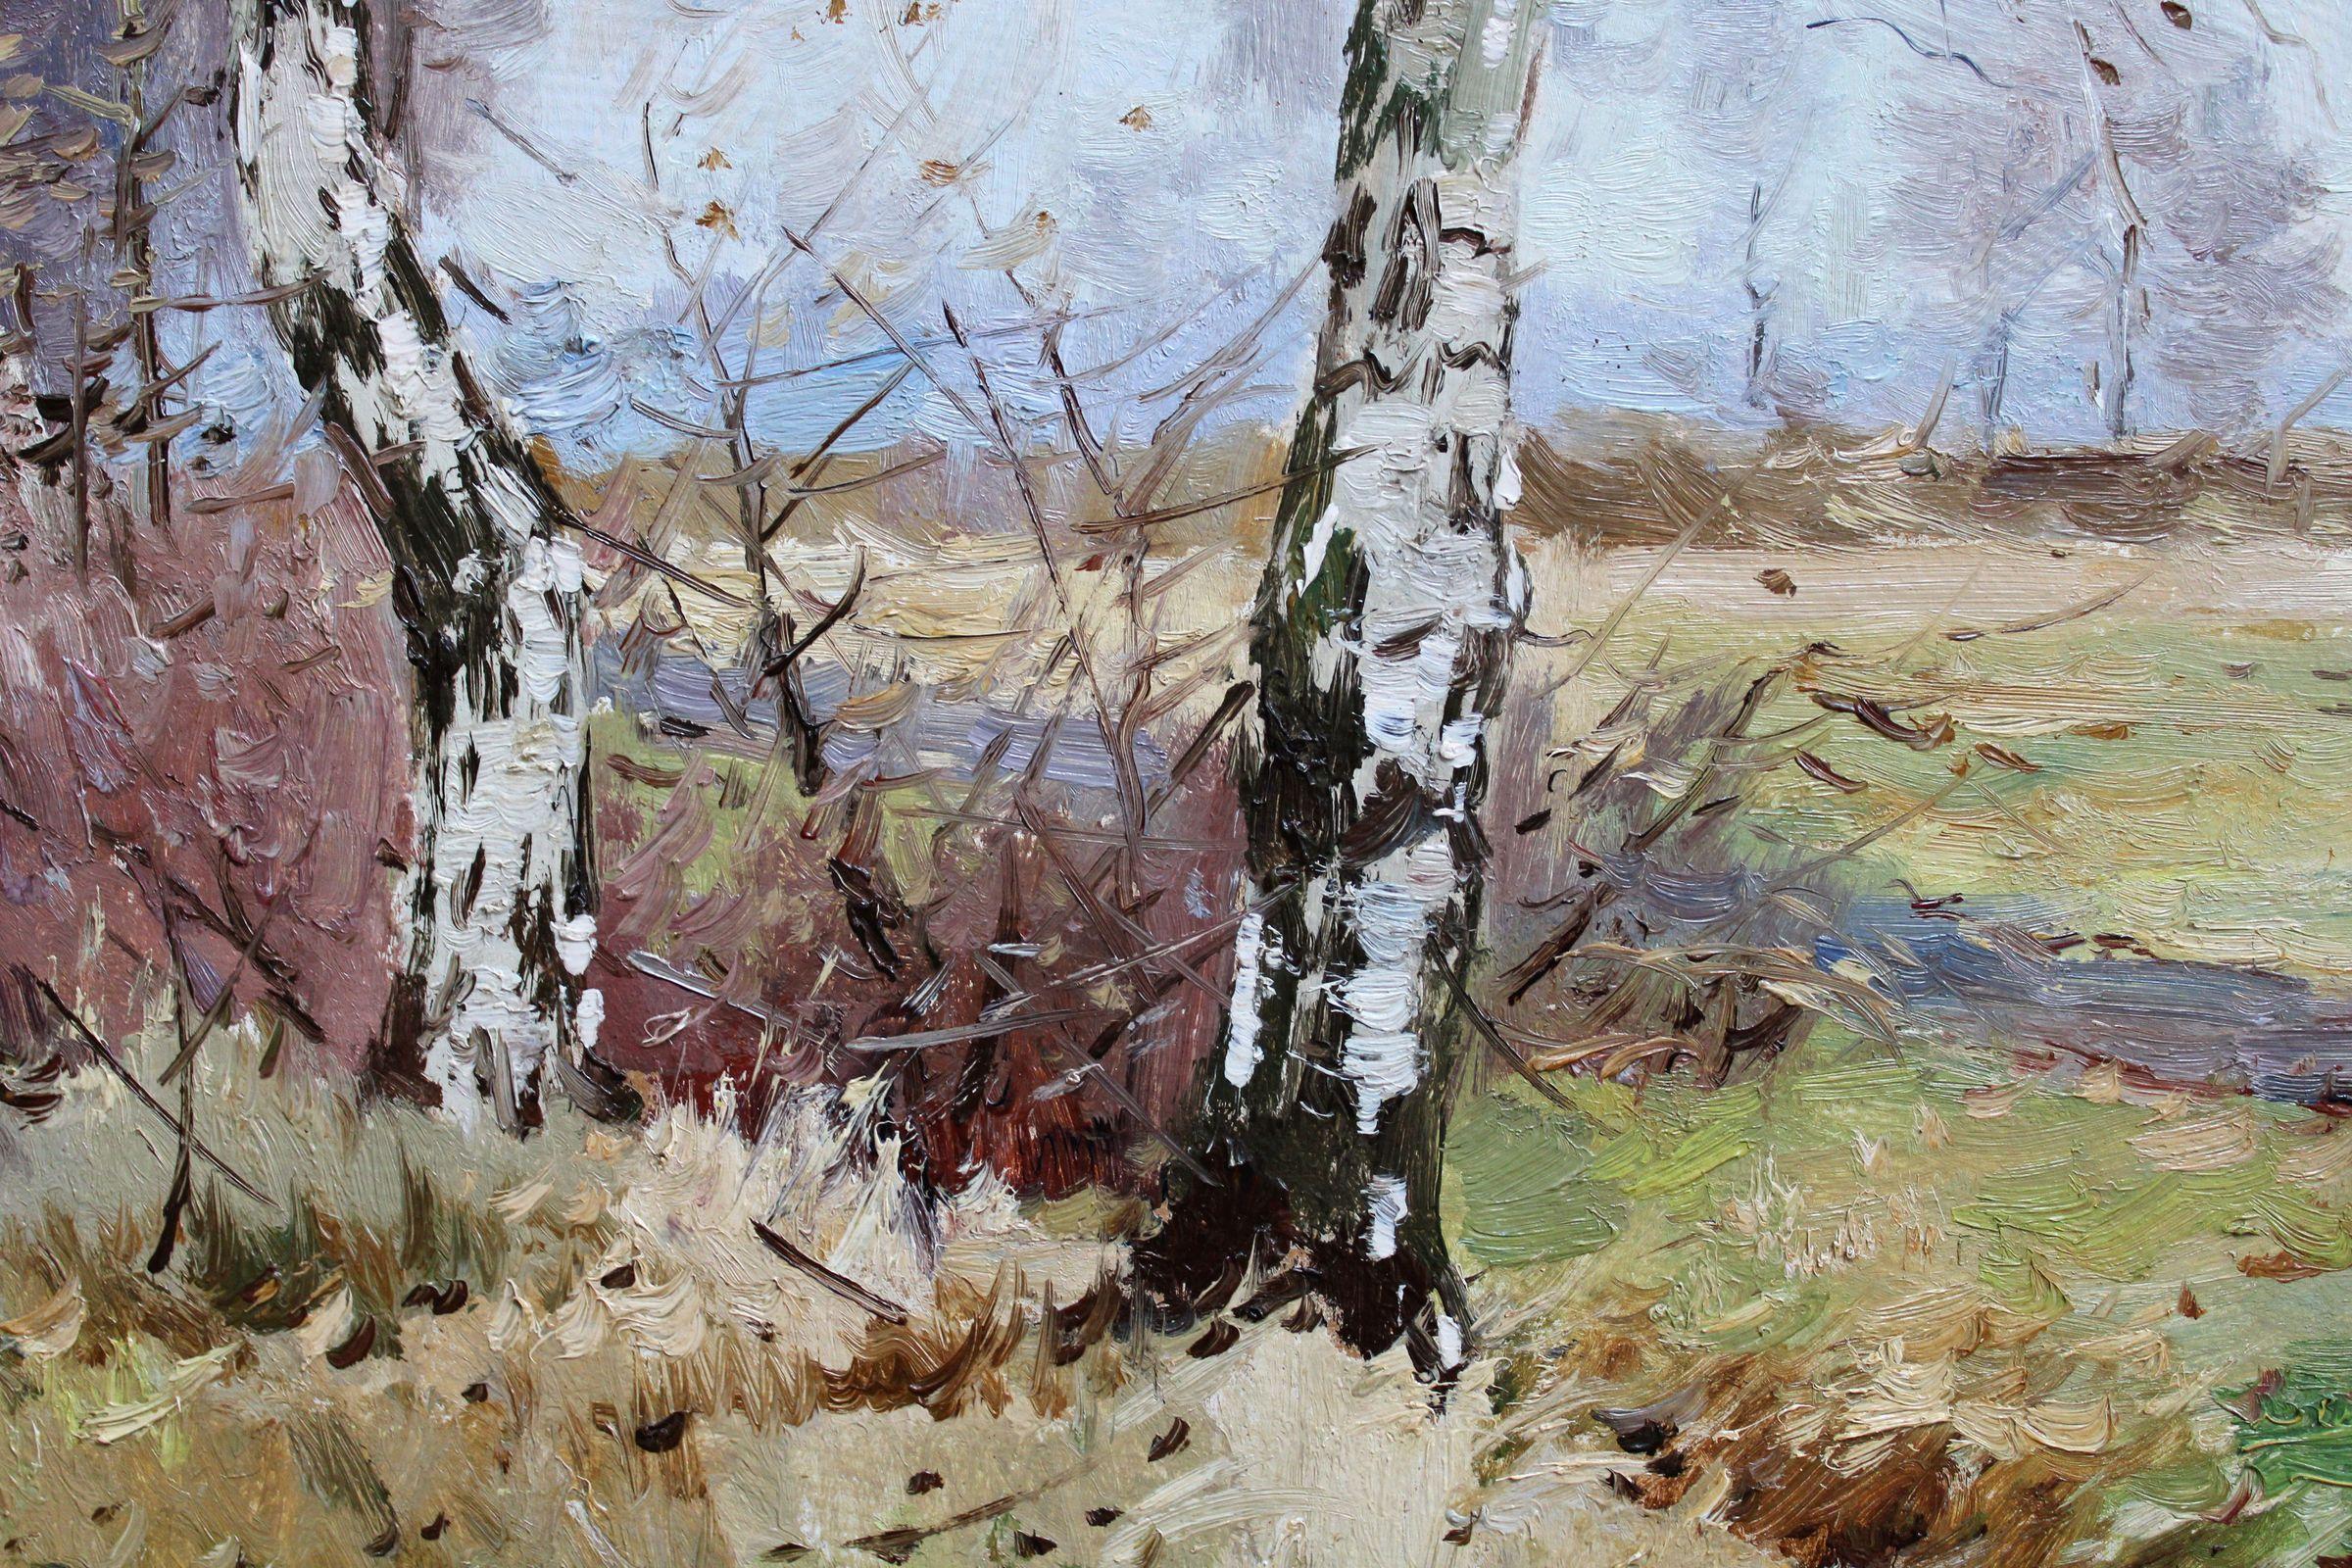 Birches. 1957, oil on board, 45x60 cm

Edgars Vinters (1919-2014)
Edgars Vinters is working in oil, watercolor and monotype techniques. He paints landscapes in different seasons and flowers. In 1970 the significant place in his creativity takes city